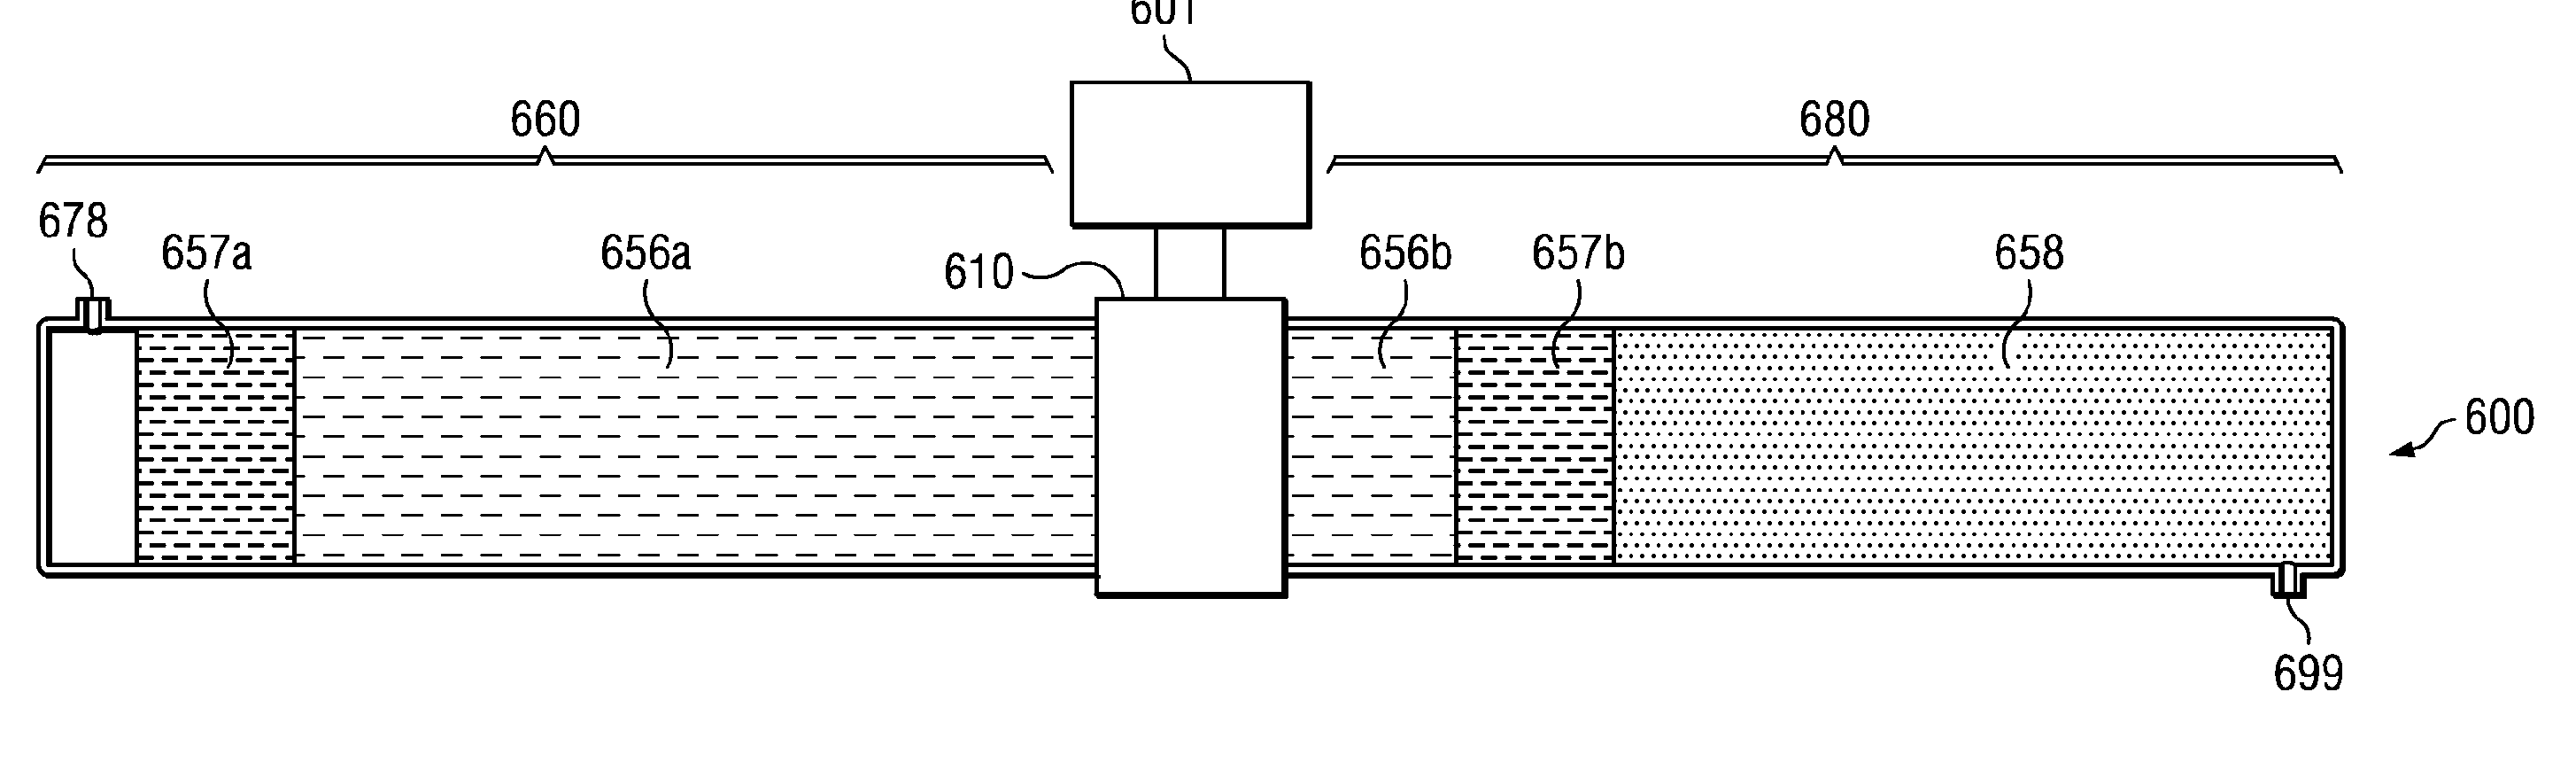 Electro-osmotic pumps, systems, methods, and compositions